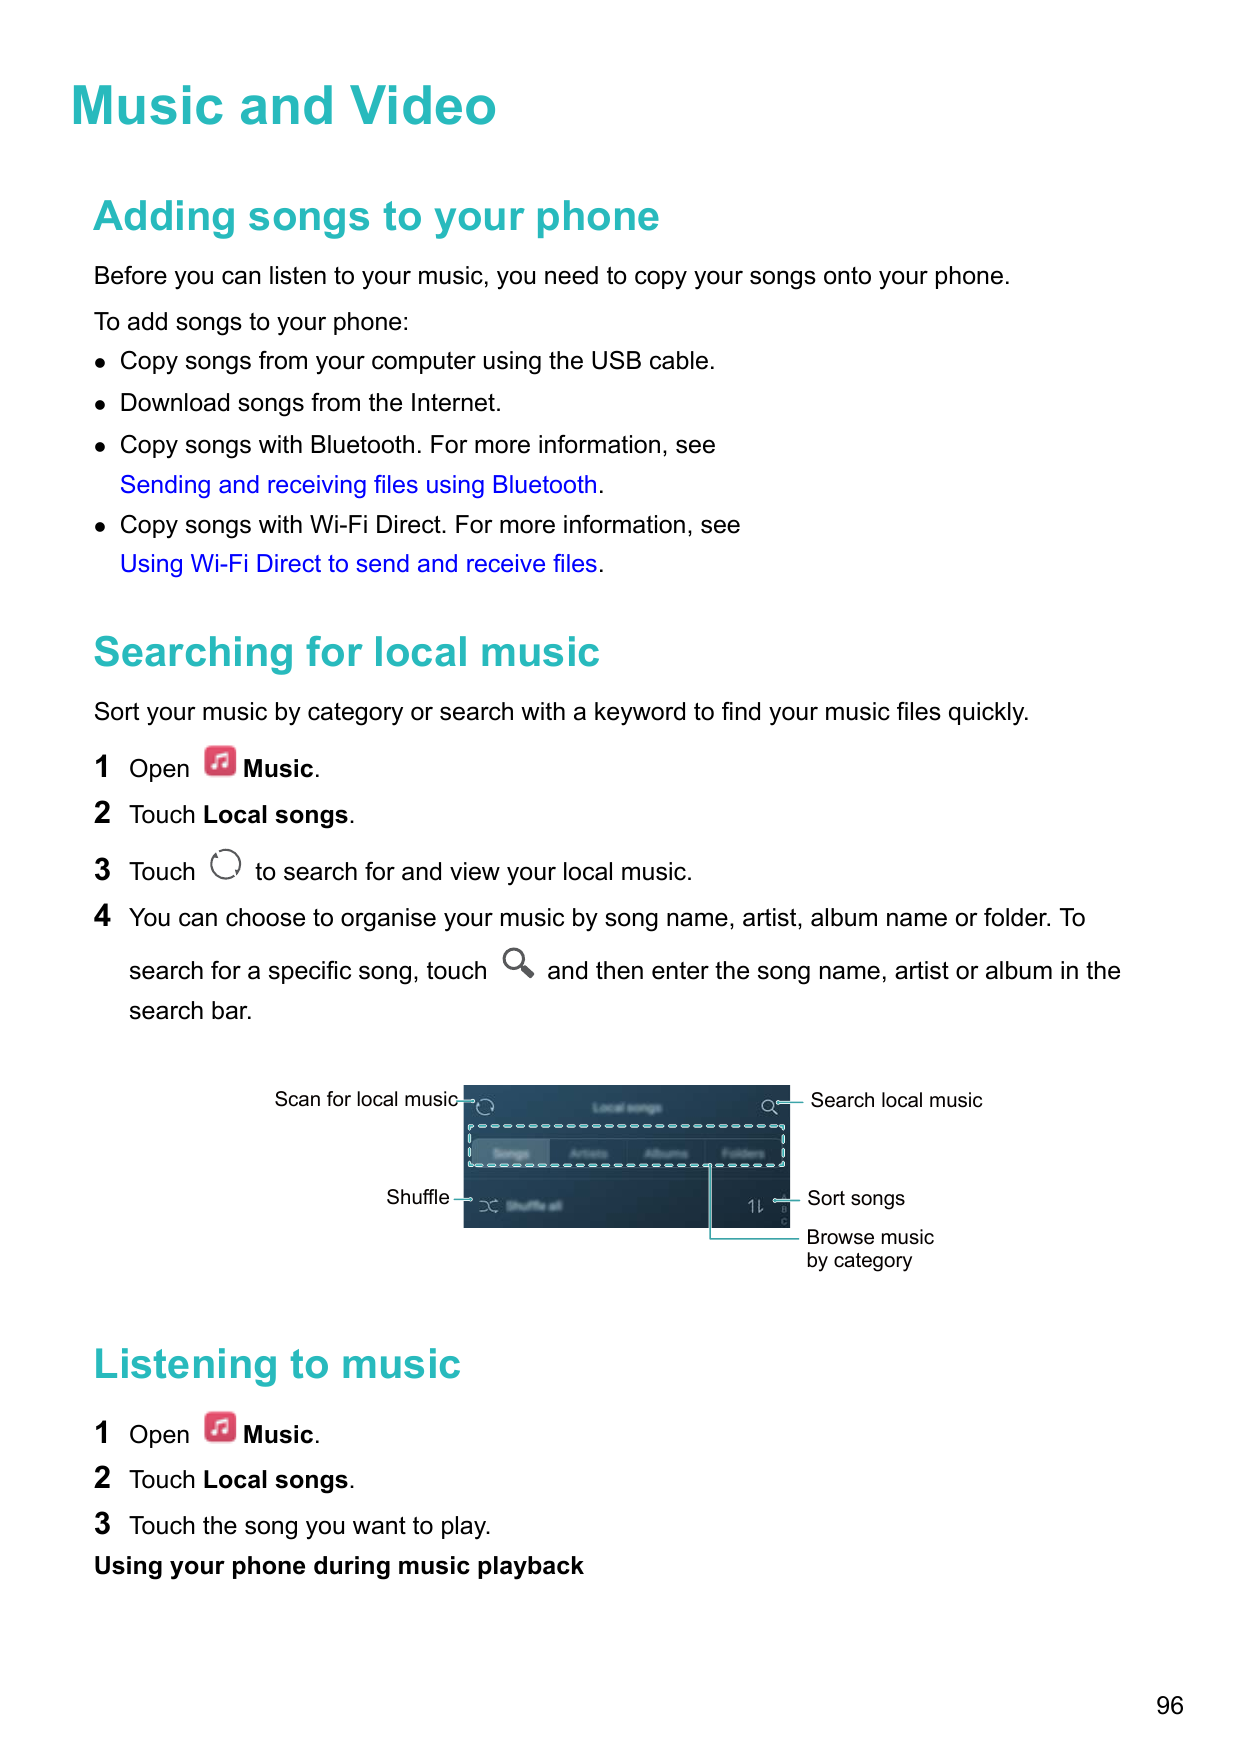 Music and VideoAdding songs to your phoneBefore you can listen to your music, you need to copy your songs onto your phone.To add